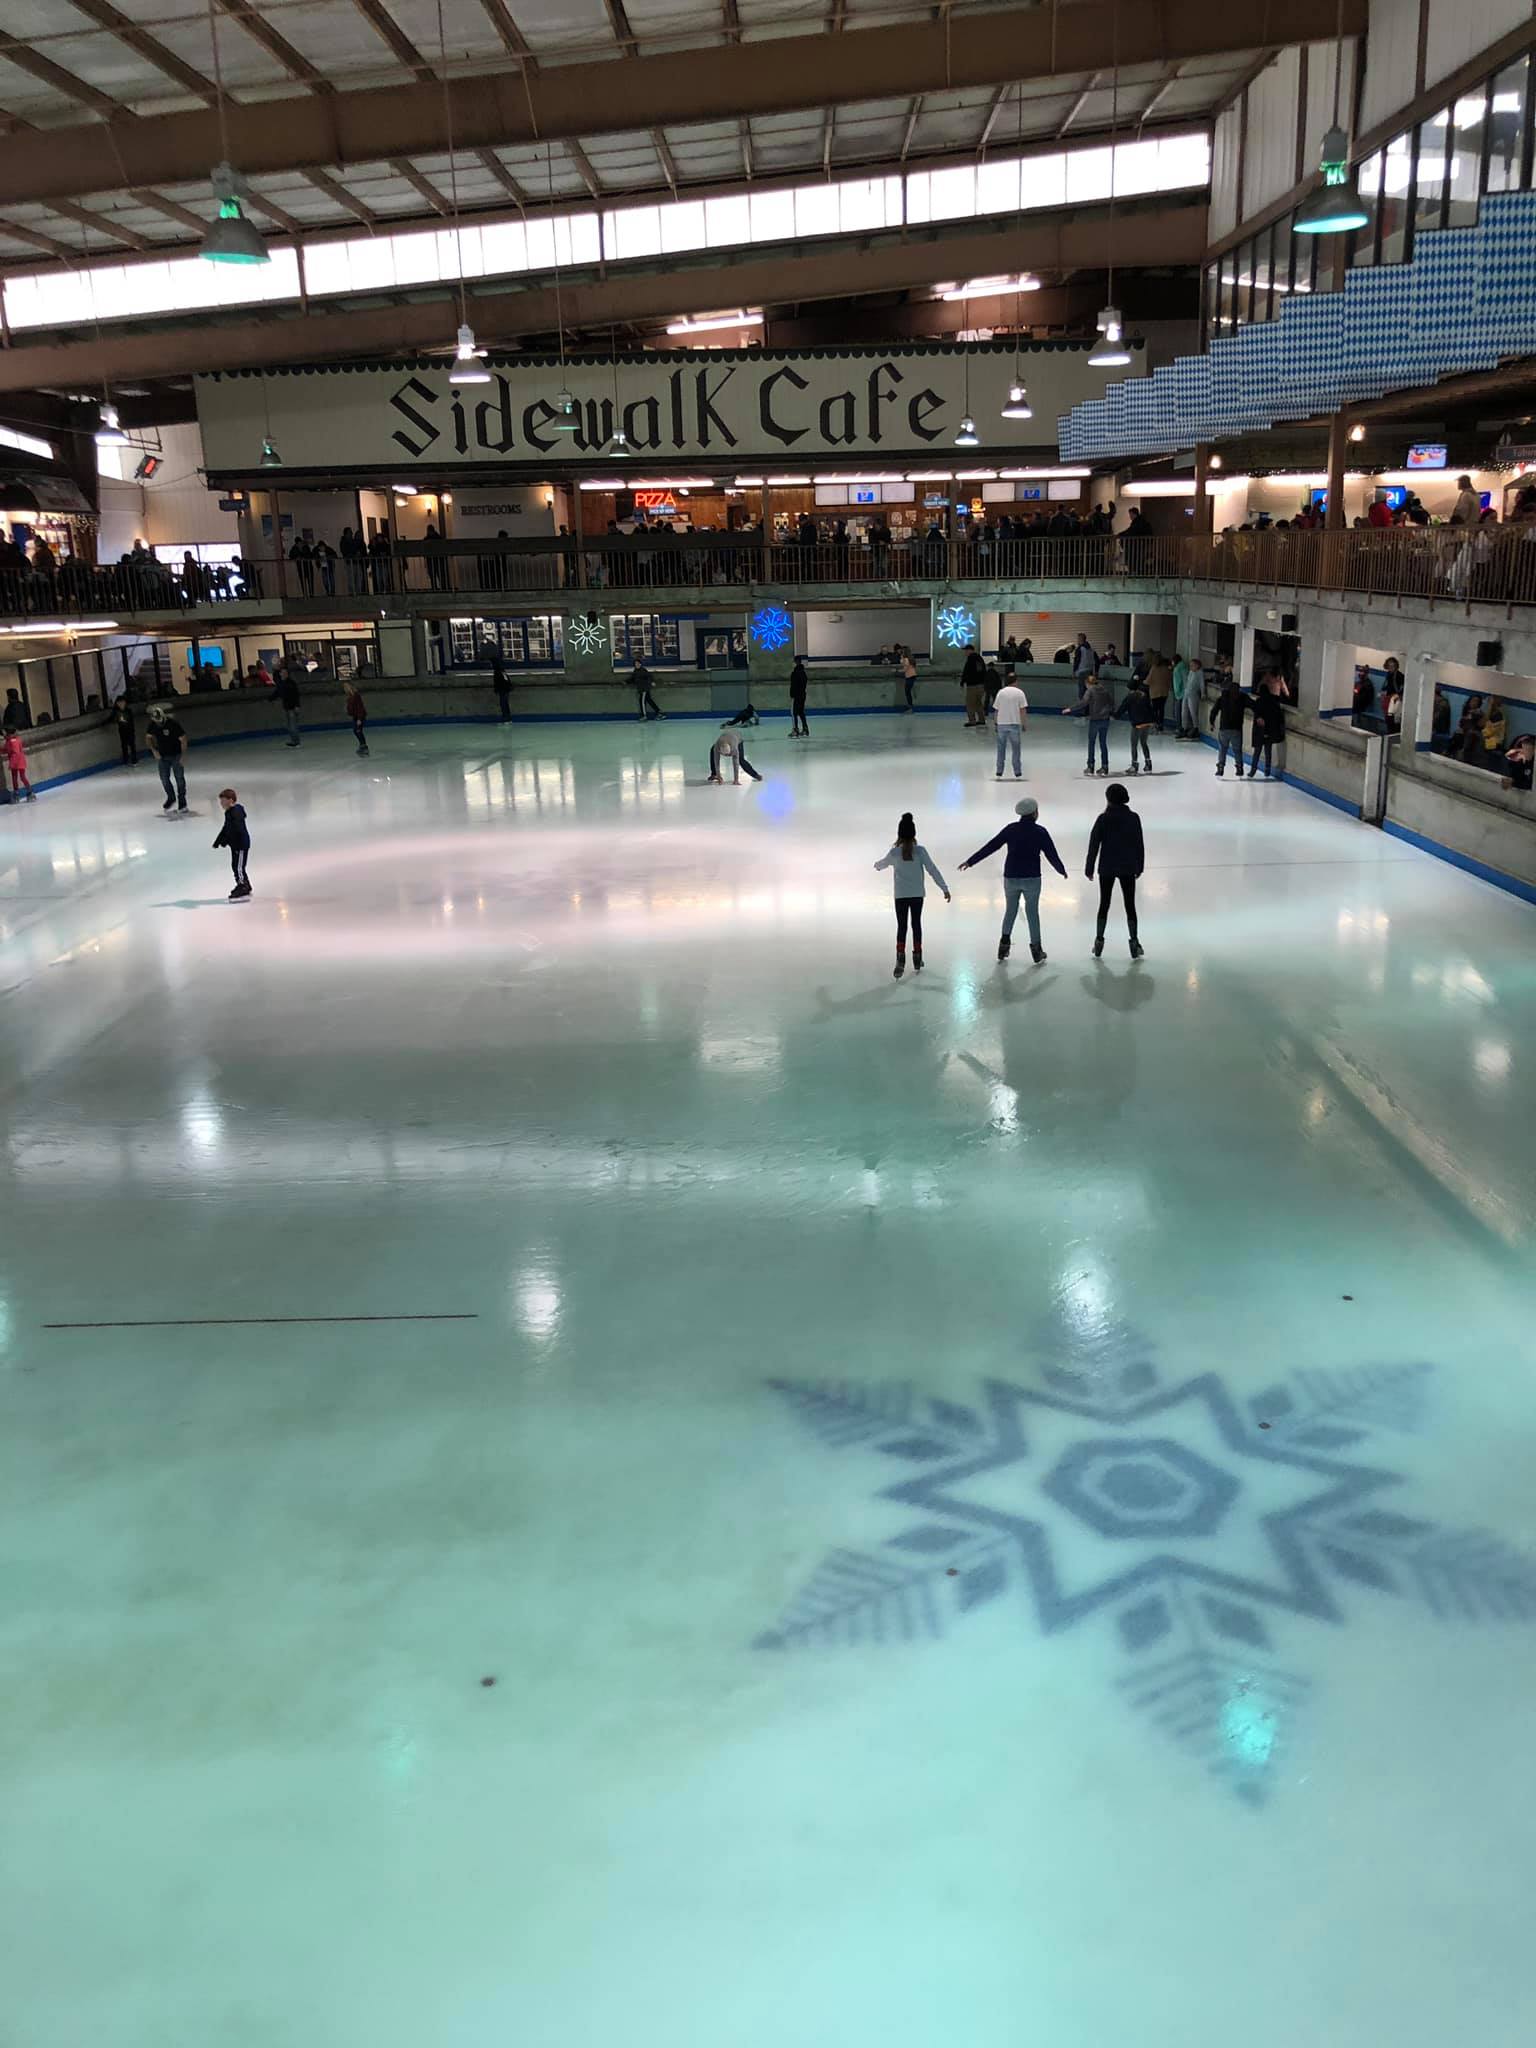 people ice skating in an indoor rink at ober gatlinburg tn as a place to go ice skating near knoxville tn 